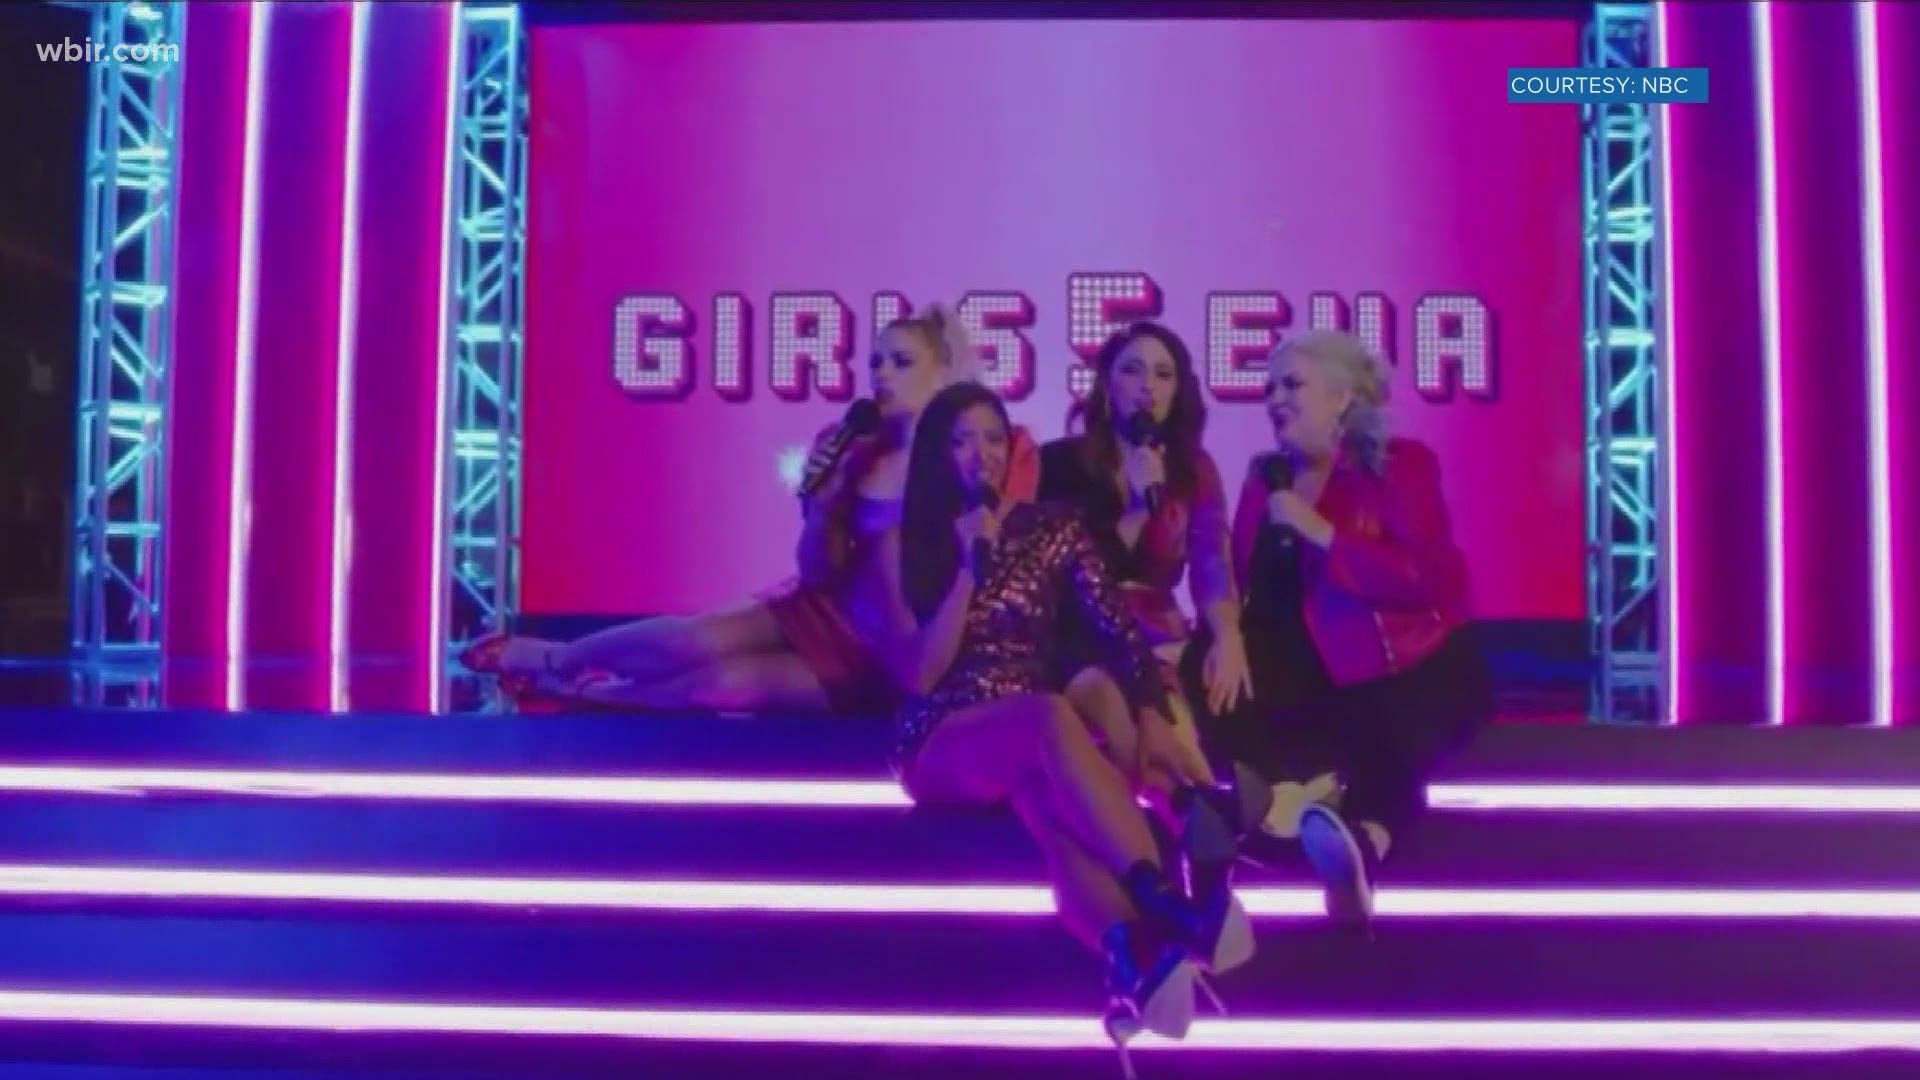 The show, "Girls5eva," follows former members of girl group two decades after their only hit song has faded from the charts.